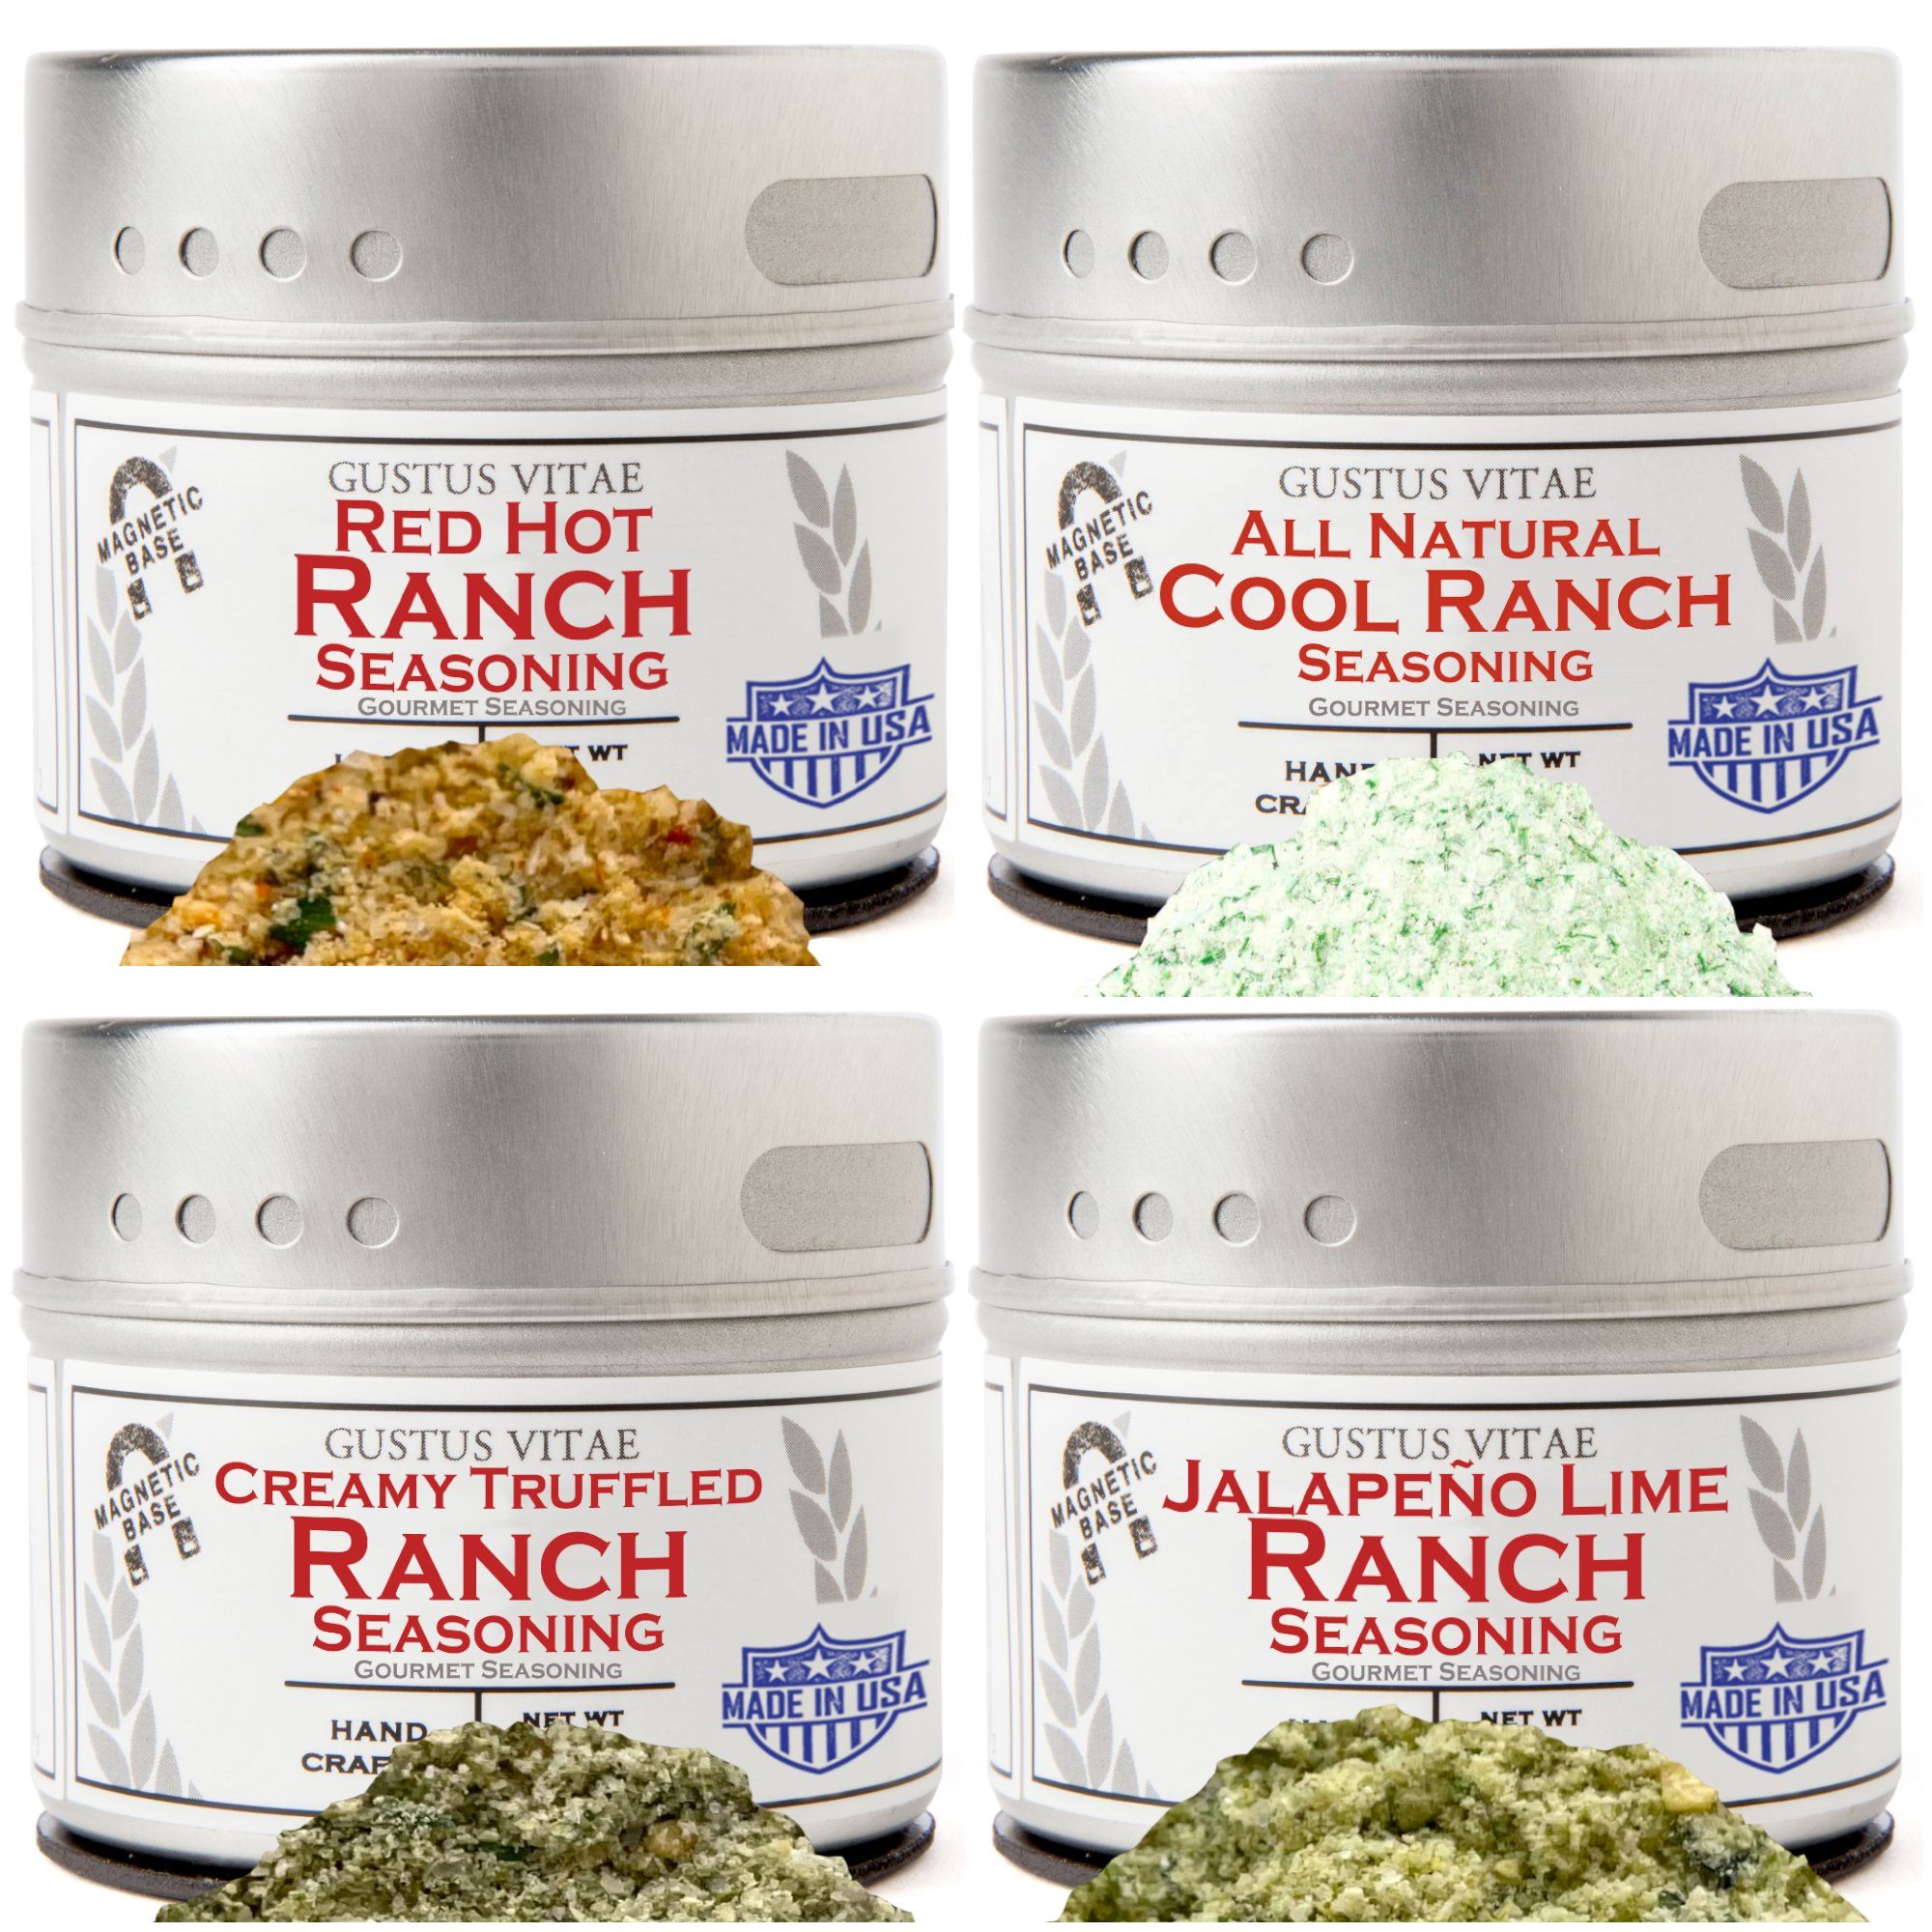 All Ranch Everything Collection | Set of 4 – Gustus Vitae